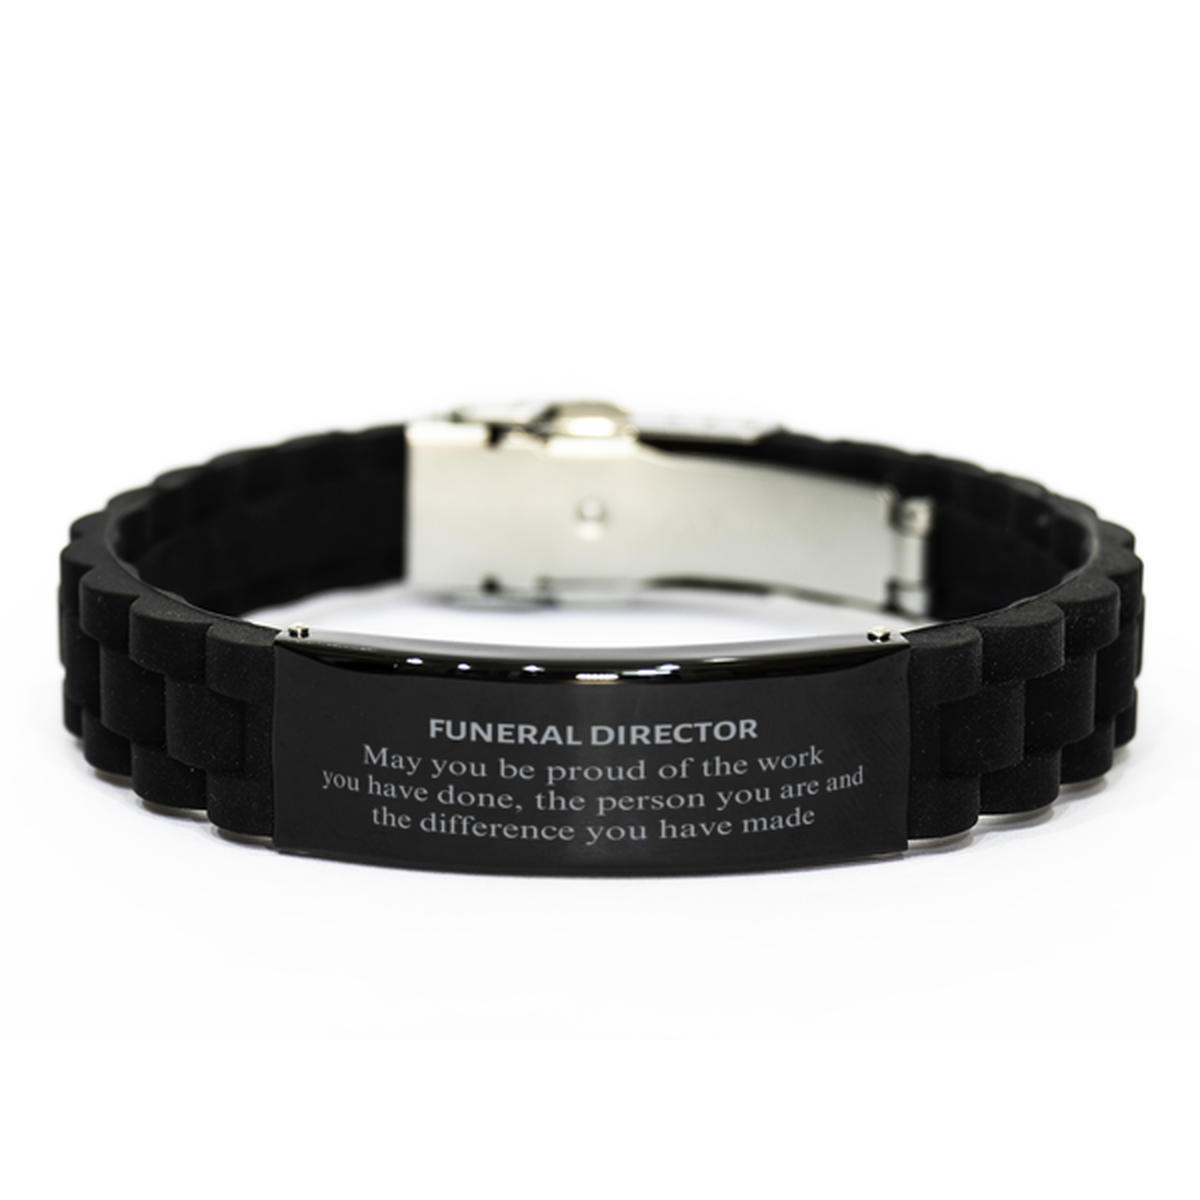 Funeral Director May you be proud of the work you have done, Retirement Funeral Director Black Glidelock Clasp Bracelet for Colleague Appreciation Gifts Amazing for Funeral Director